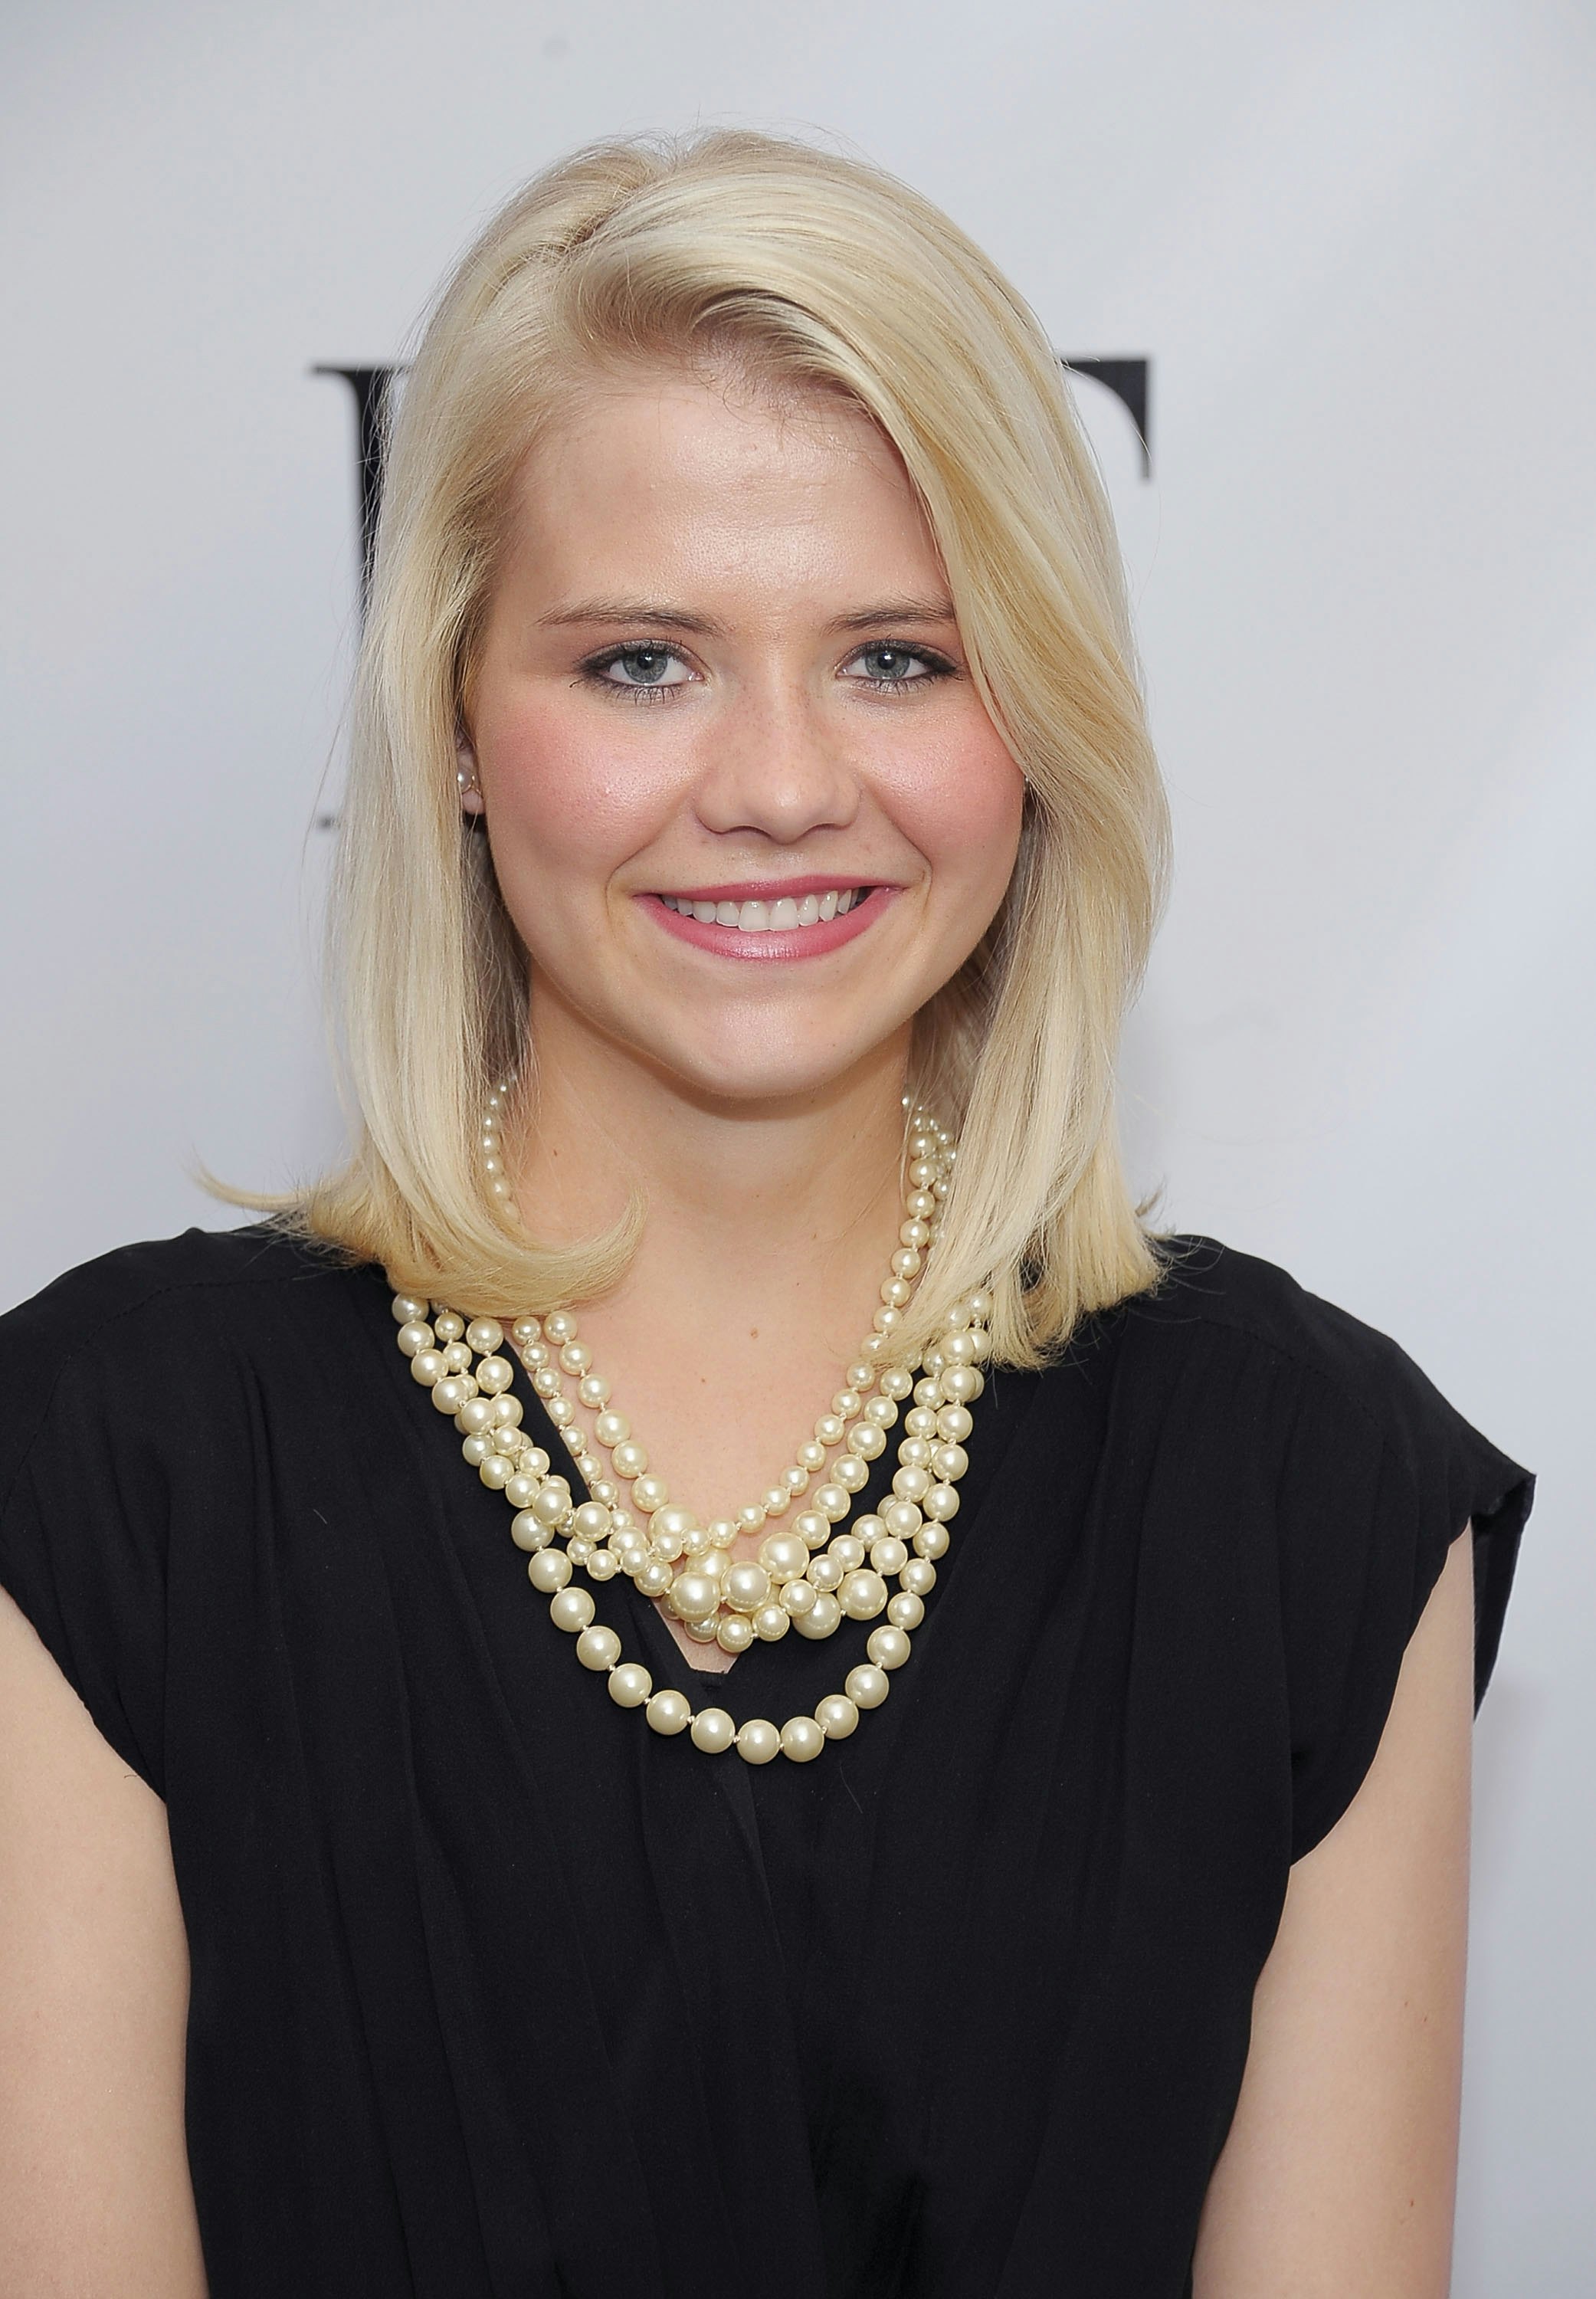 Elizabeth Smart Will Narrate Details Of Her Abduction In A Lifetime Movie & Her Strength Is RemarkableElizabeth Smart Will Narrate Details Of Her Abduction For Lifetime - 웹